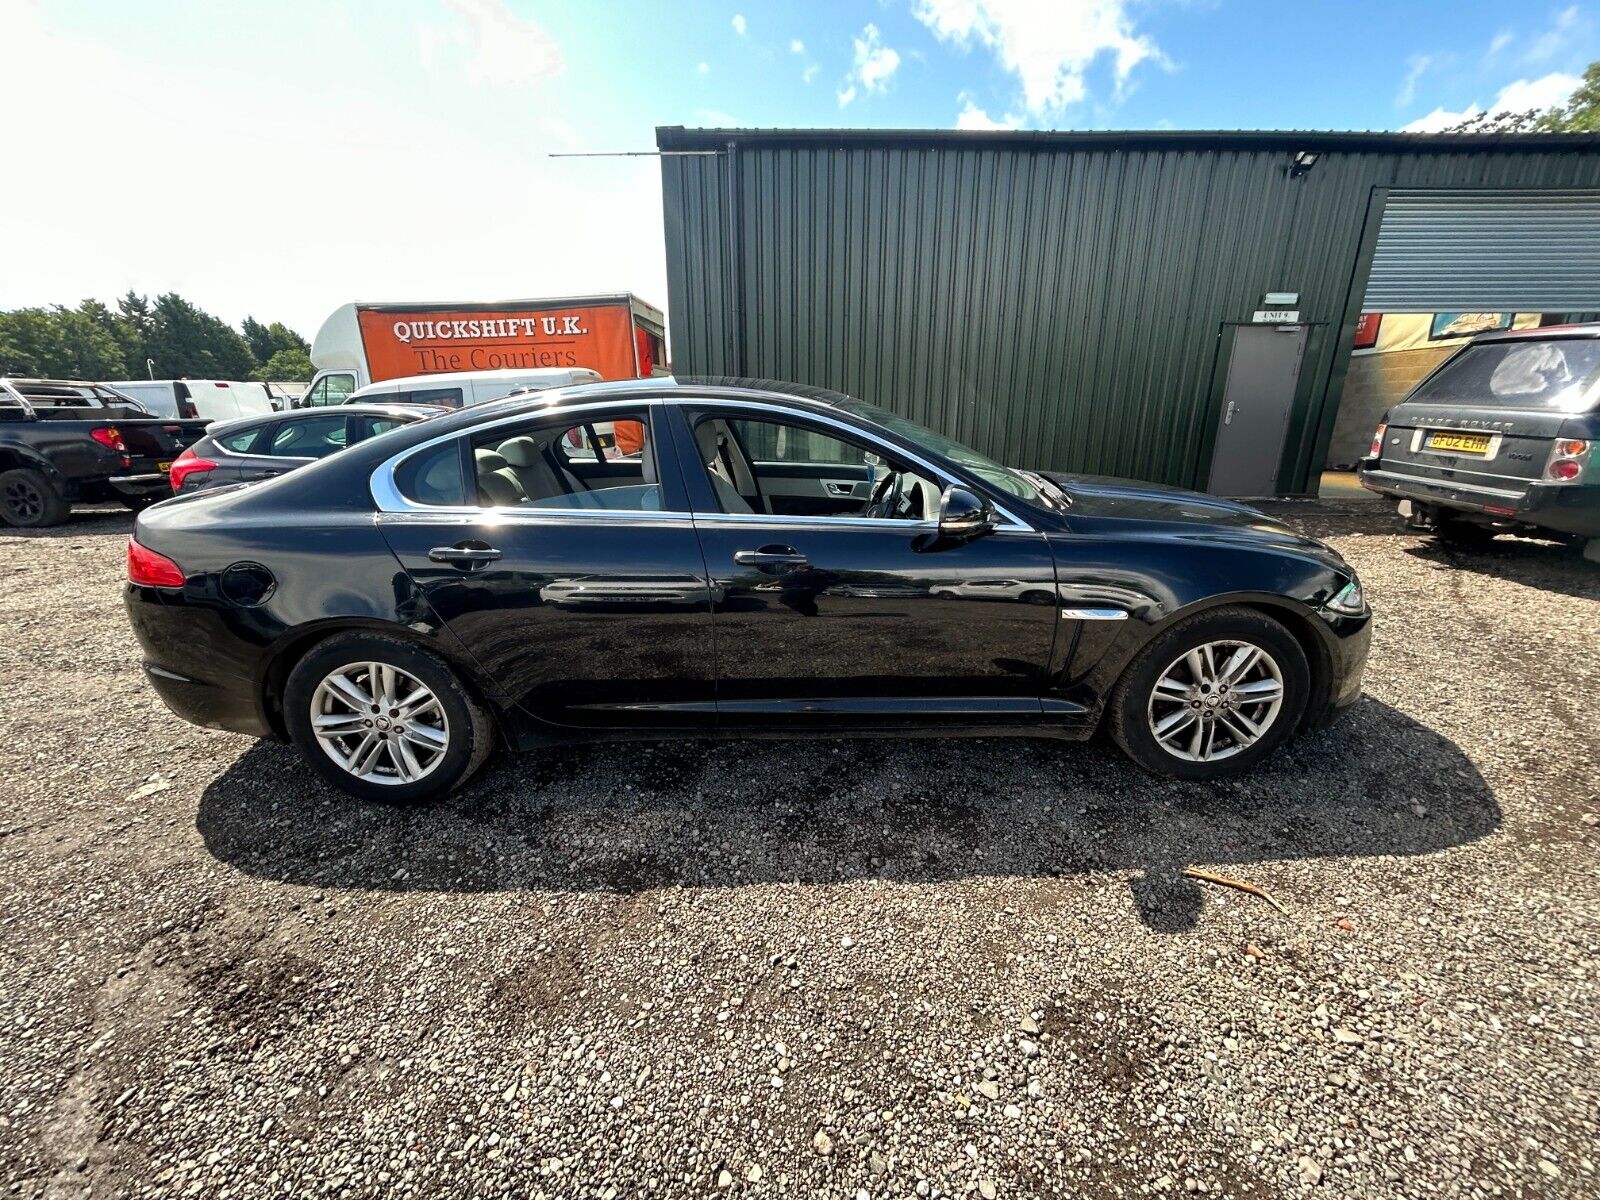 Bid on JAGUAR XF DIESEL SALOON 2.2D LUXURY 4DR AUTO 12 MONTHS MOT (NO VAT ON HAMMER) - IN DAILY USE- Buy &amp; Sell on Auction with EAMA Group